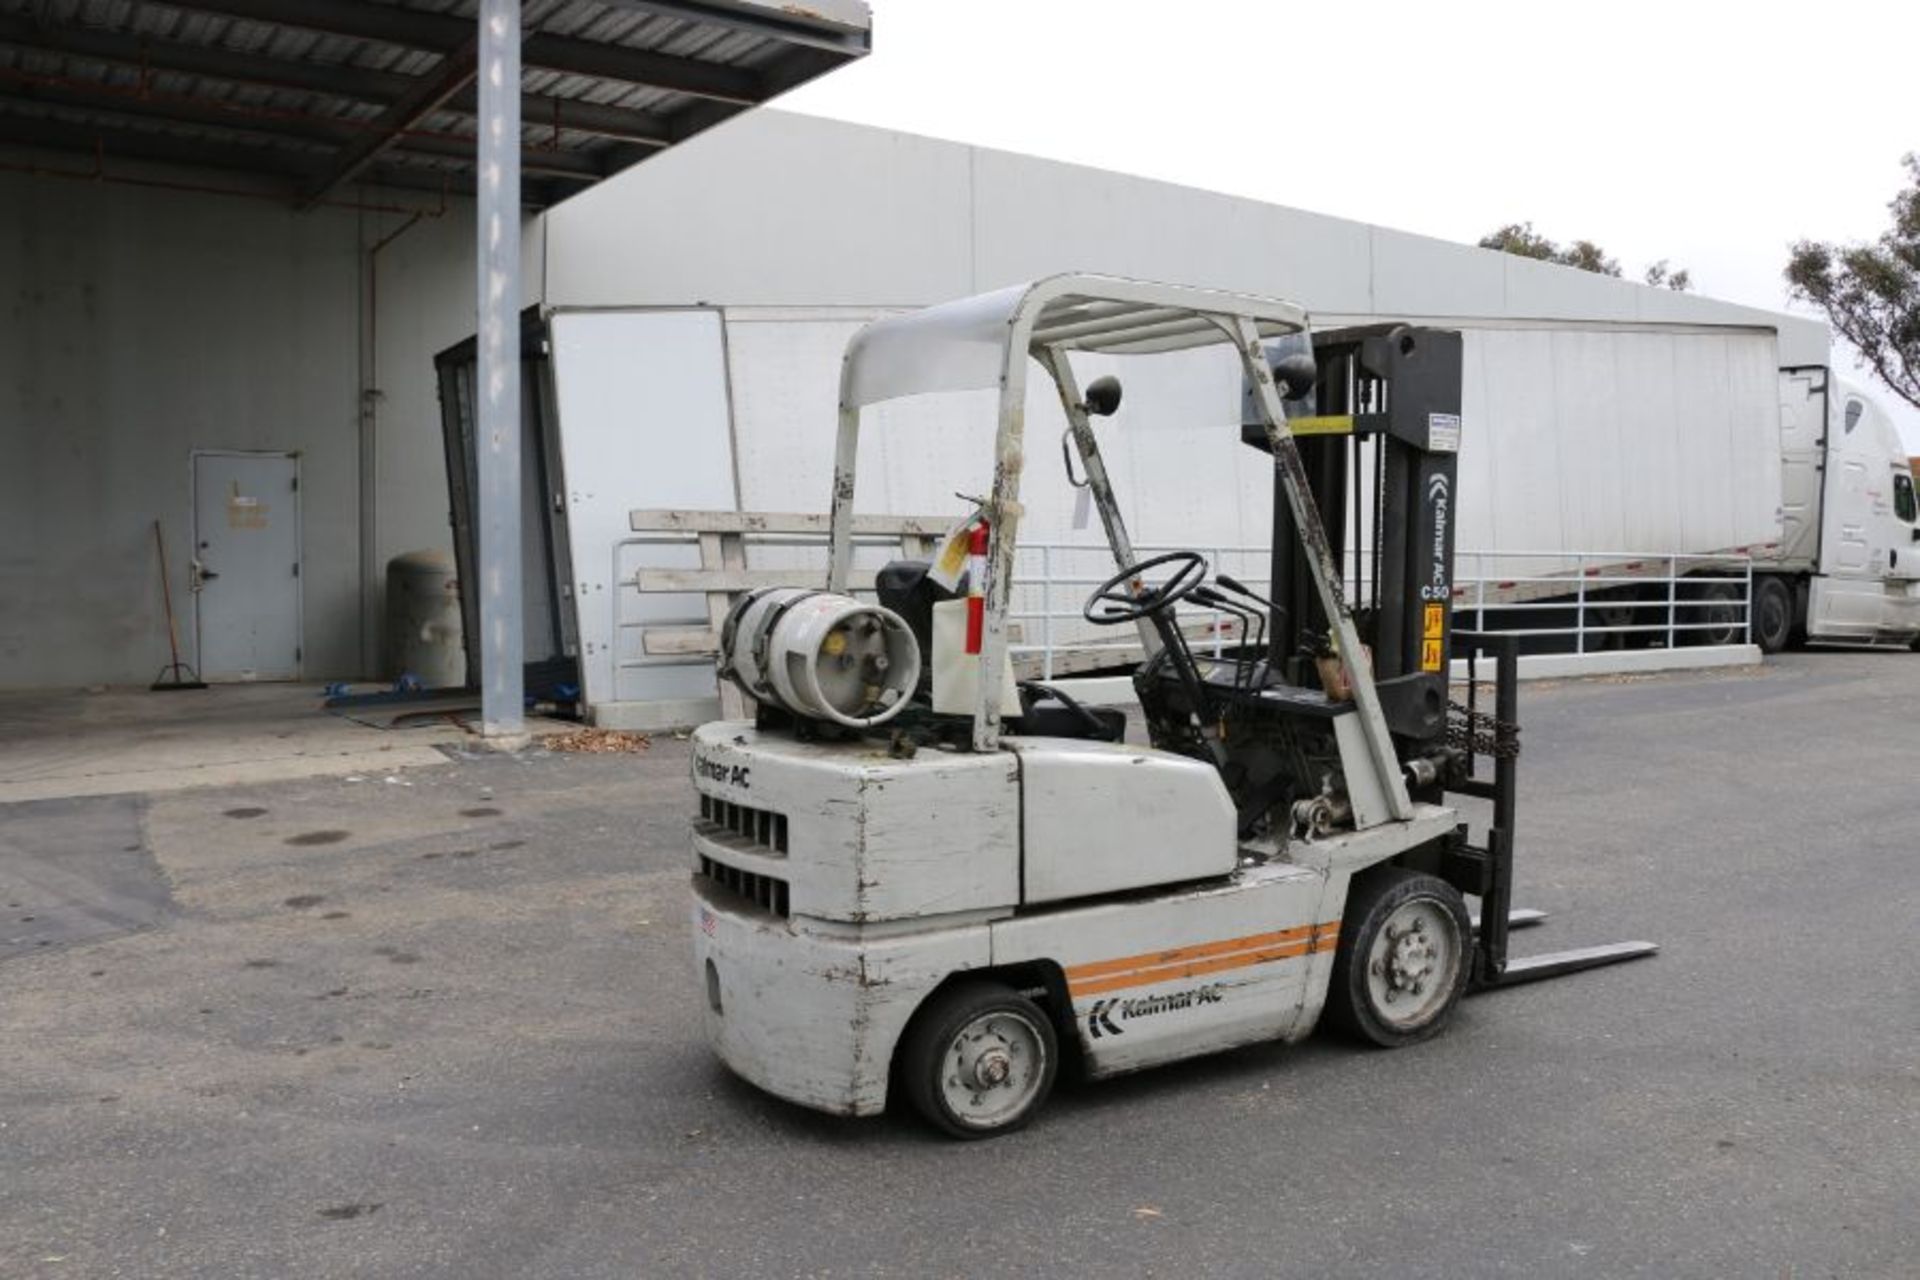 Kalmar C-50 Fork Lift, LPG, 4500 Lbs Cap., 6823 Hrs, s/n 178006A *Late Delivery* - Image 4 of 6